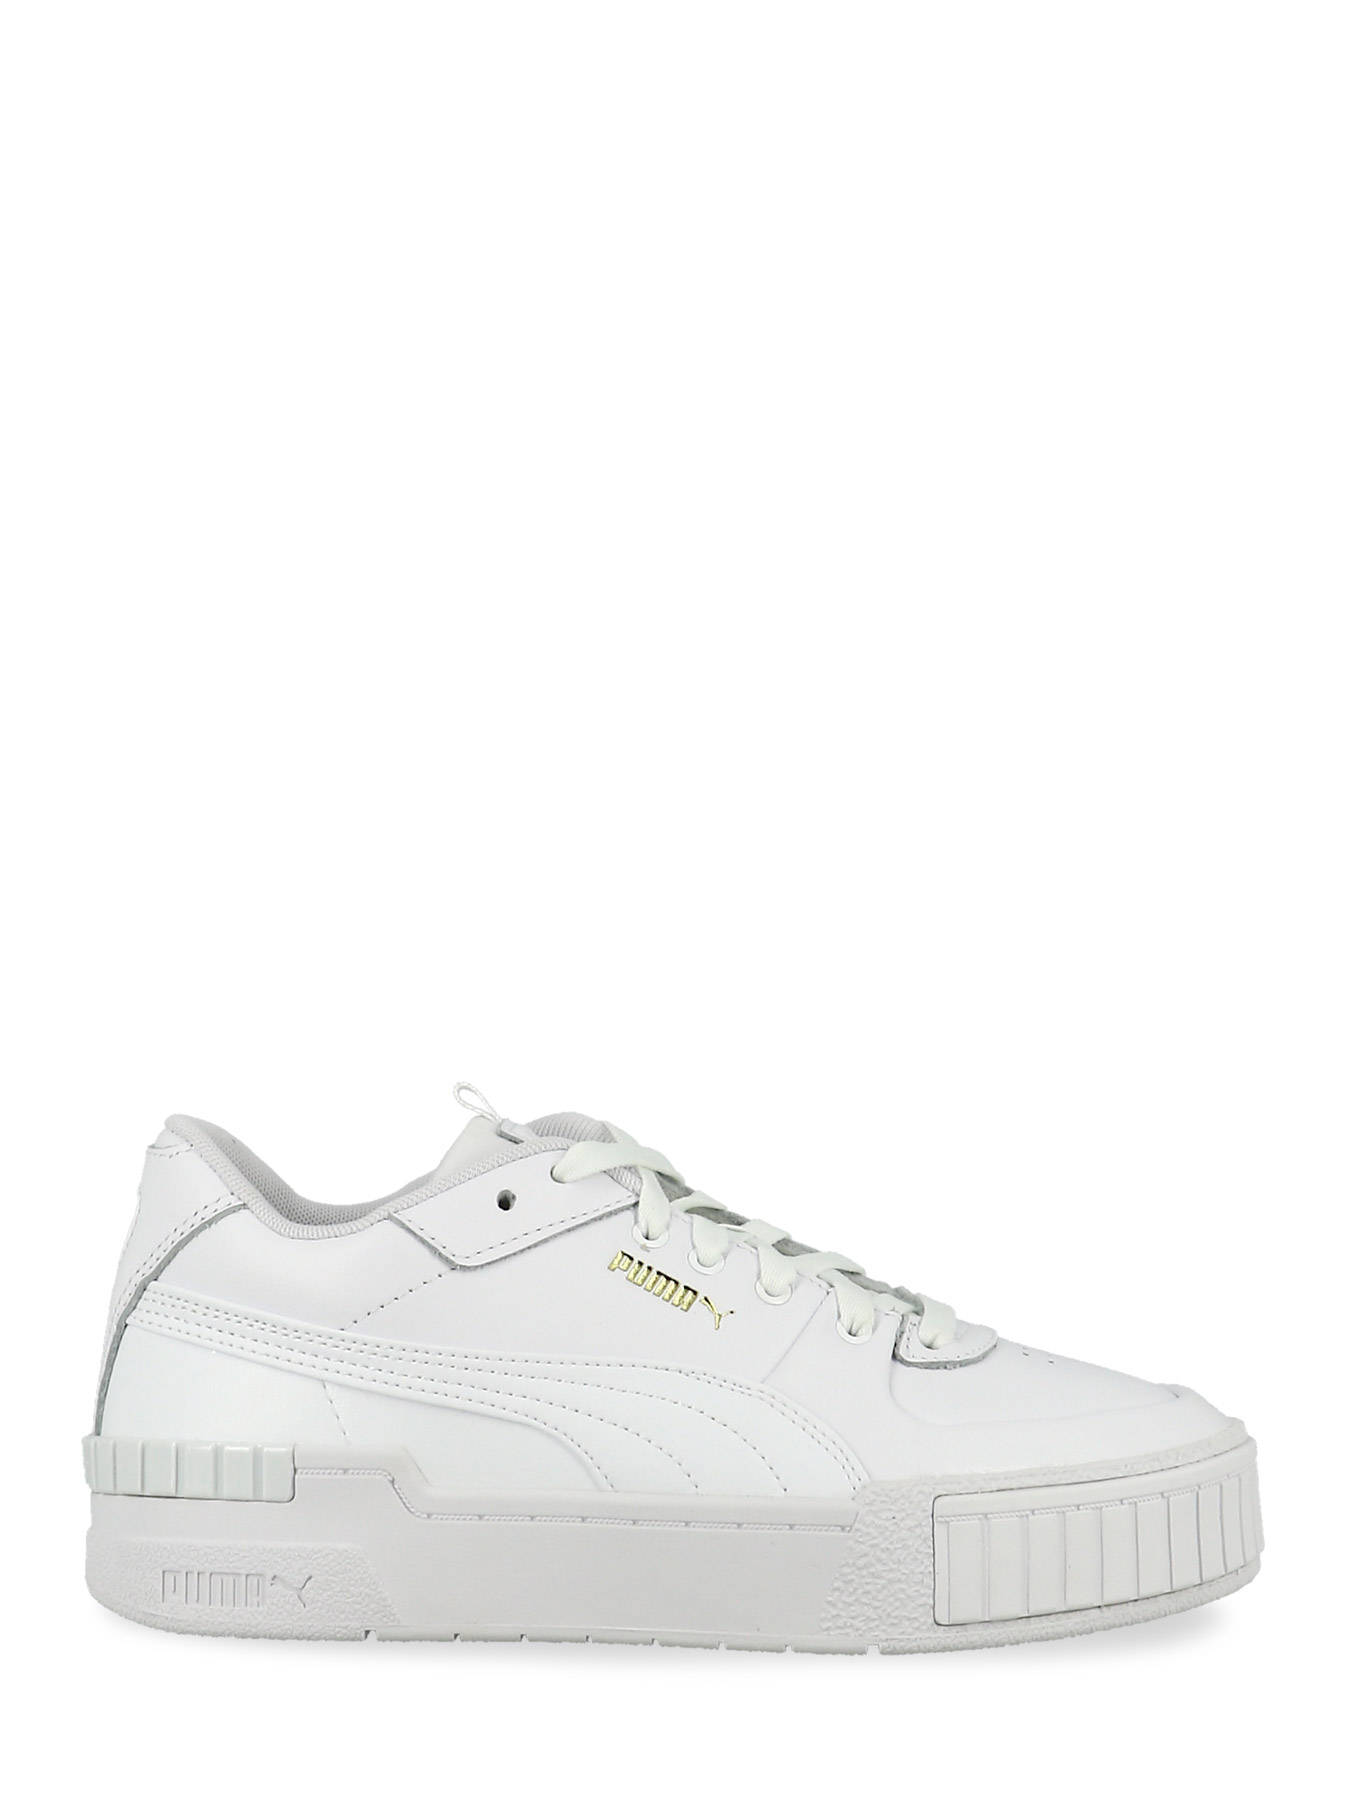 Puma Sneakers CALI SPORT WNS - best prices